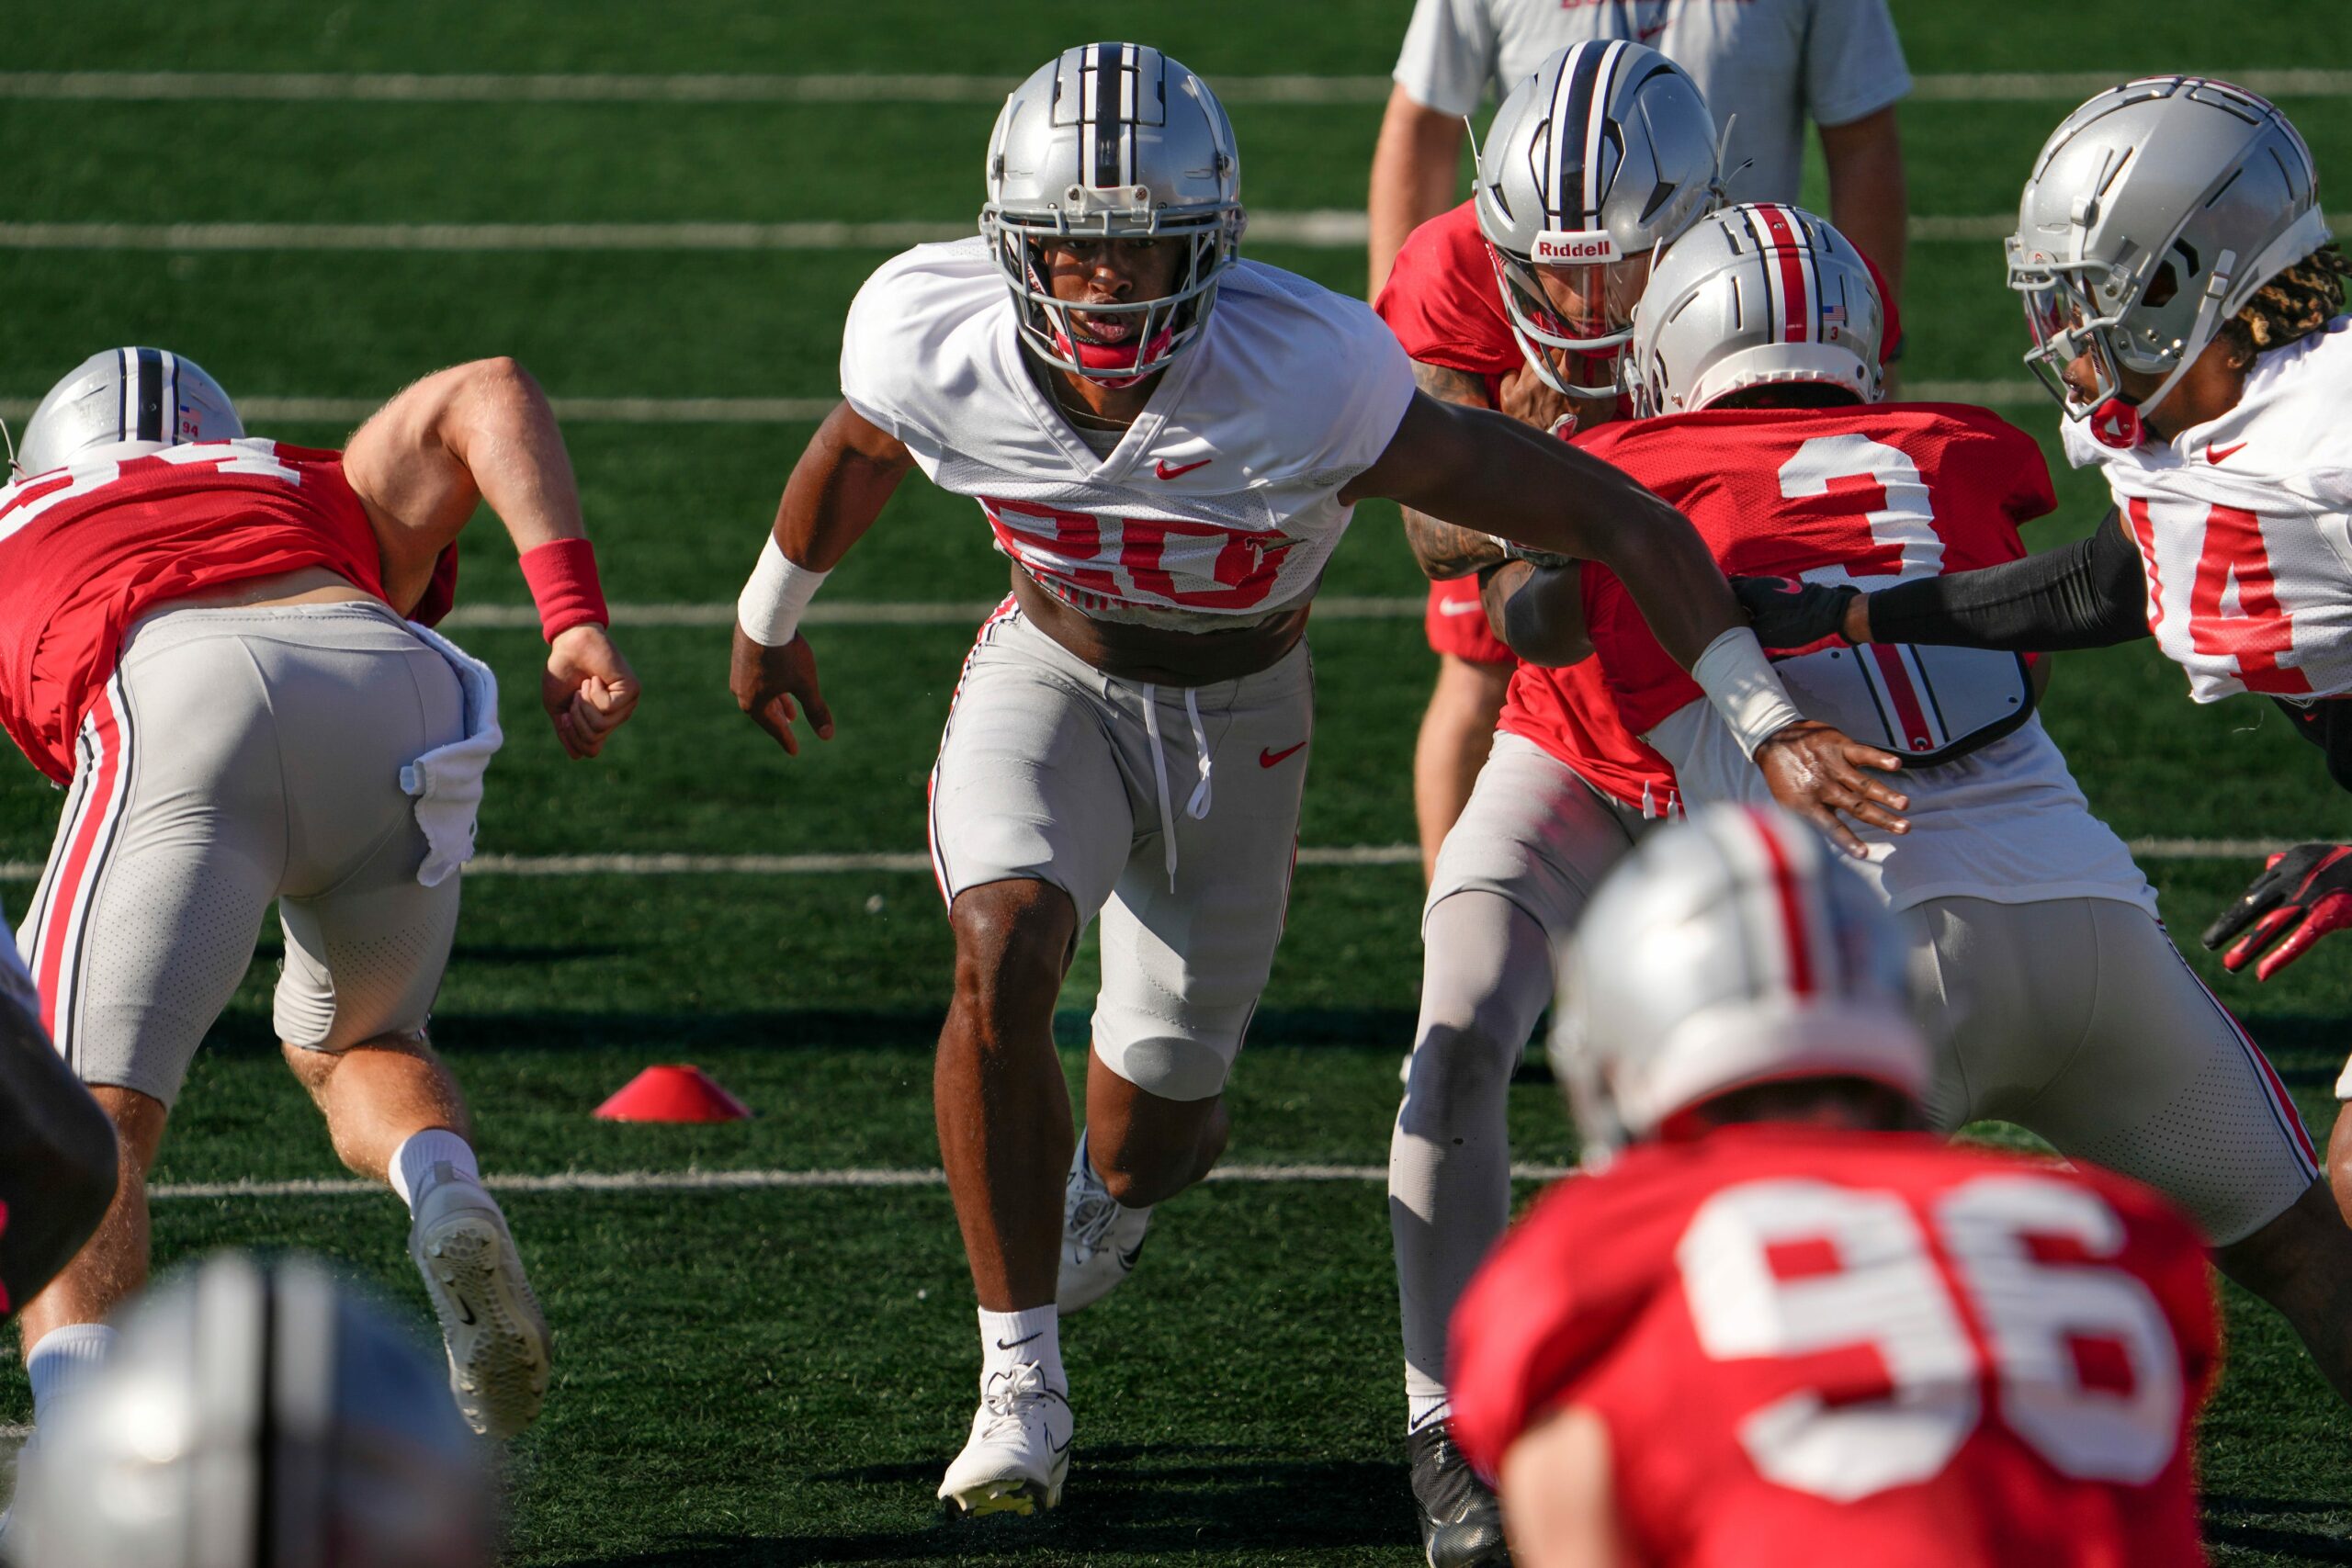 Ohio State coaching staff impressed with freshman Sonny Styles